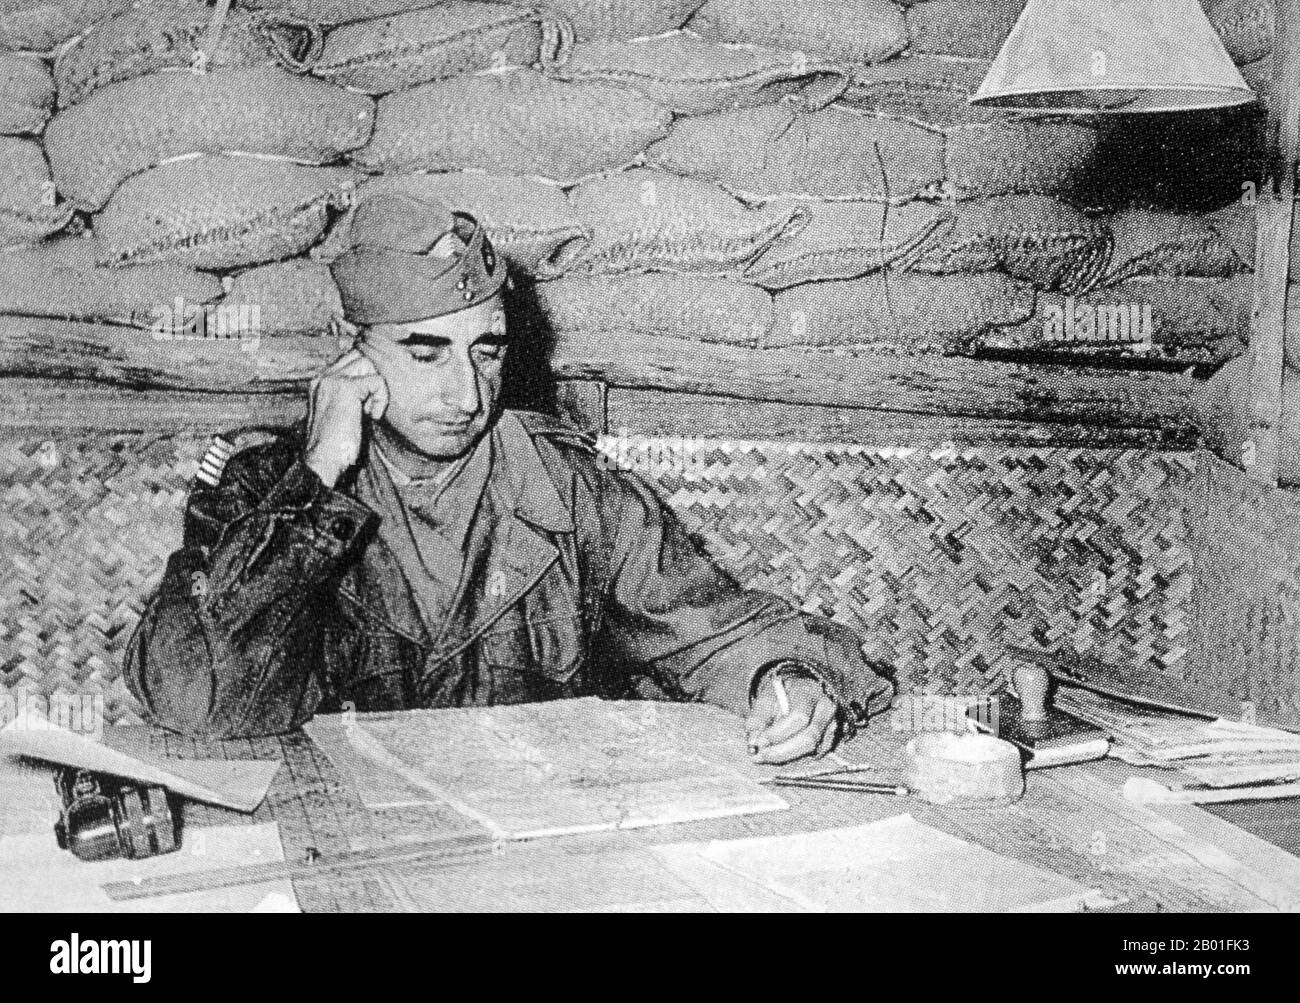 Vietnam: French General Christian De Castries in his command post at Dien Bien Phu, May 1954.  The important Battle of Dien Bien Phu was fought between the Việt Minh (led by General Vo Nguyen Giap), and the French Union (led by General Henri Navarre, successor to General Raoul Salan). The siege of the French garrison lasted fifty-seven days, from 5:30    PM on March 13 to 5:30 PM on May 7, 1954.  The southern outpost or fire base of the camp, Isabelle, did not follow the cease-fire order and fought until the next day at 01:00 AM. Stock Photo